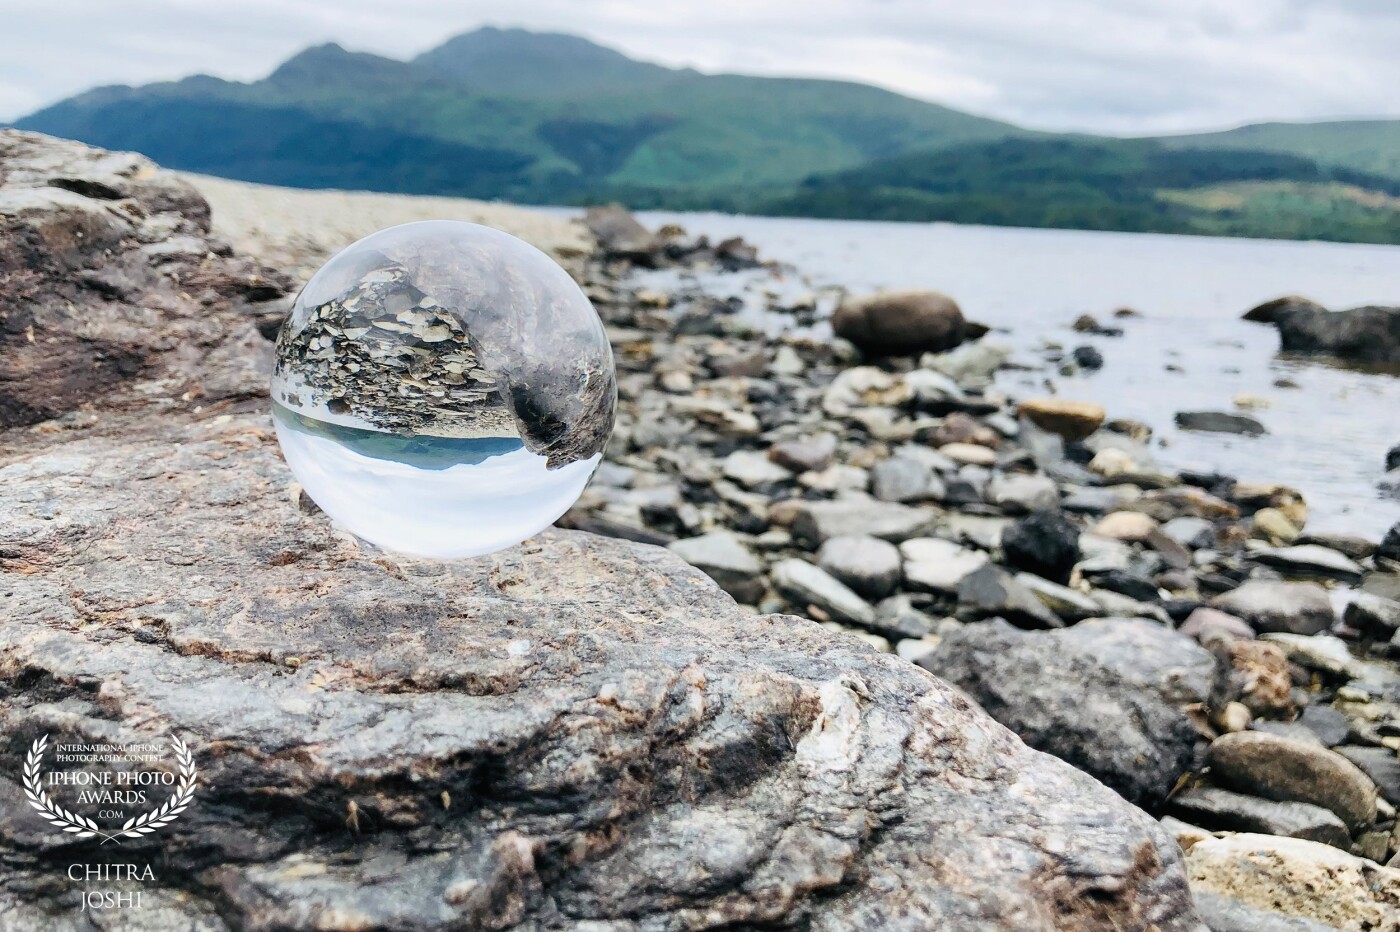 A random stop in beautiful Scotland, United Kingdom! No matter what the scenery is, lens ball captures the view stunningly. Another experimental shot with lens ball photography.